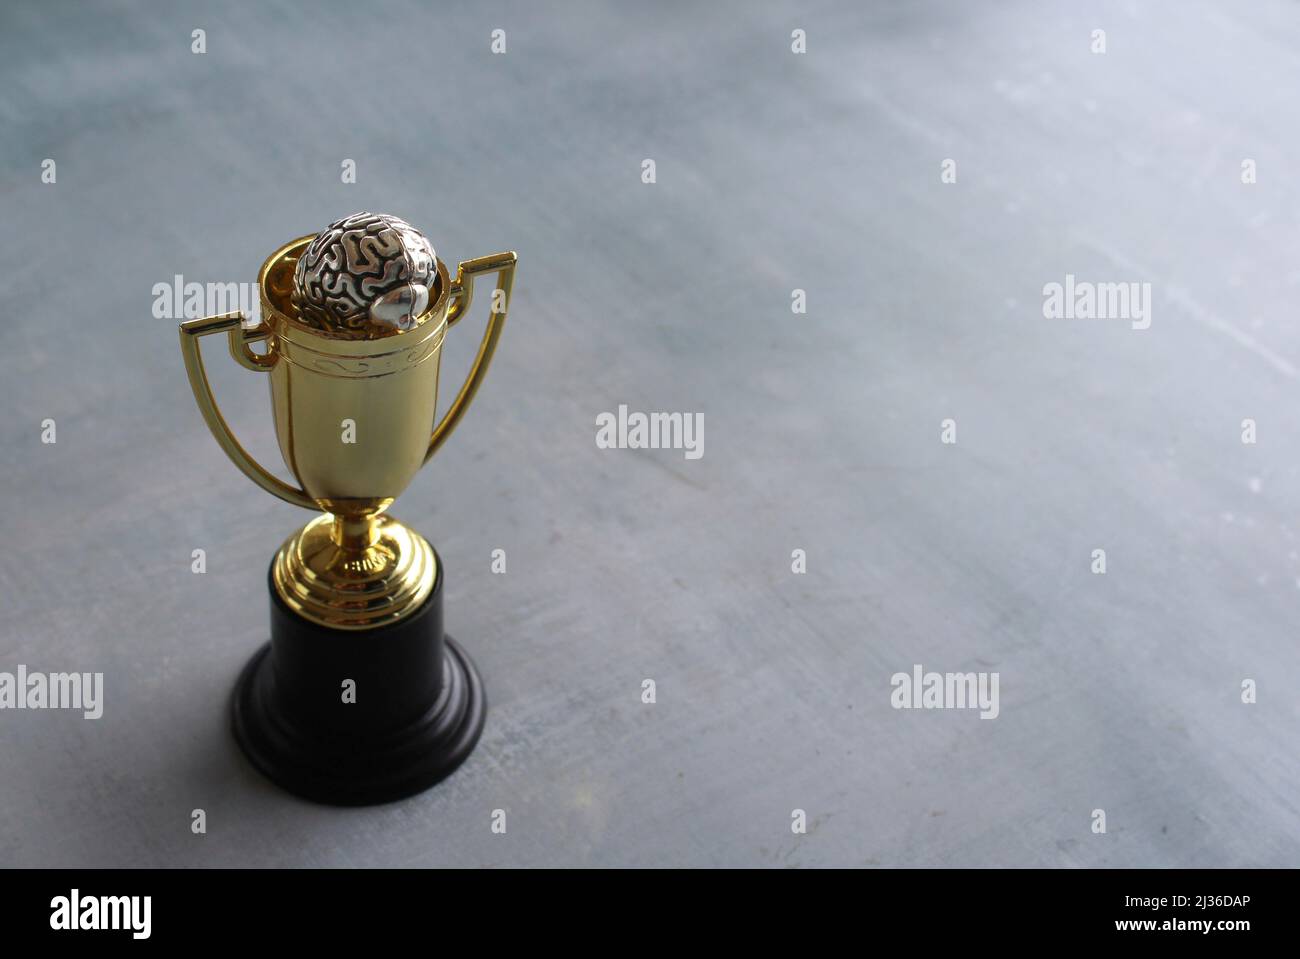 Brain inside gold cup trophy with copy space. Winning mentality and mindset concept. Stock Photo